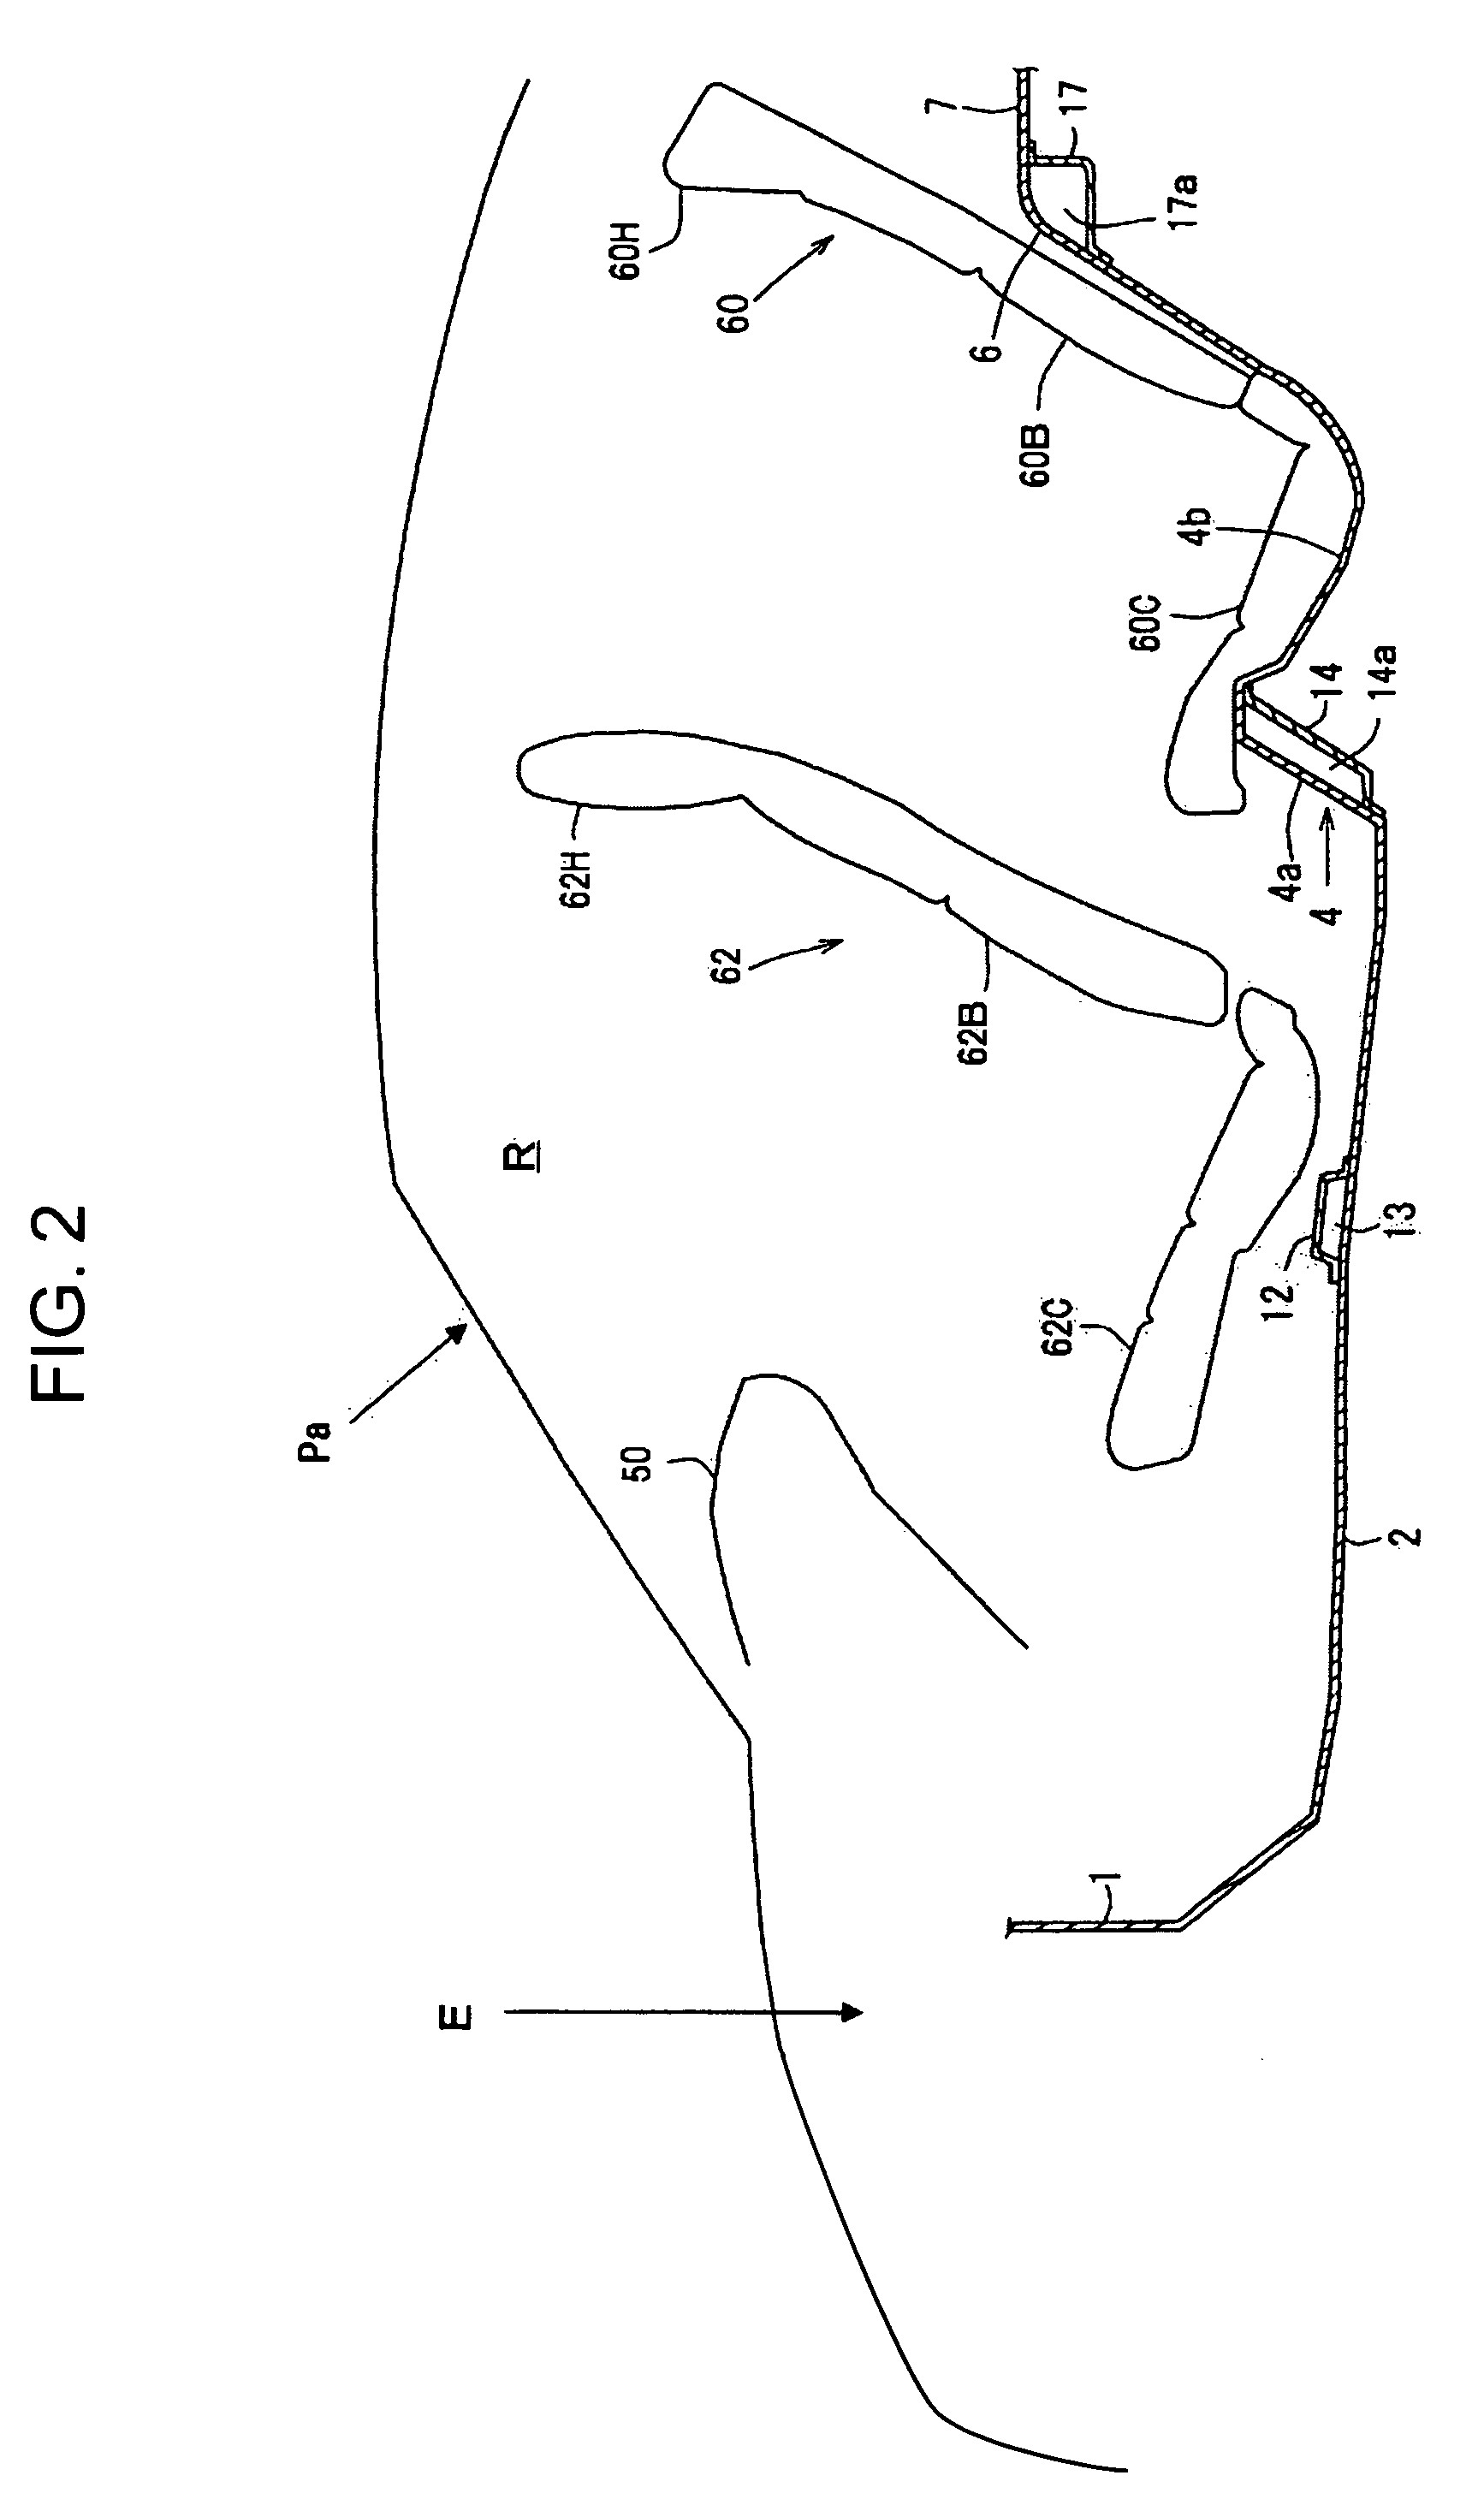 Arrangement structure for auxiliary component of vehicle